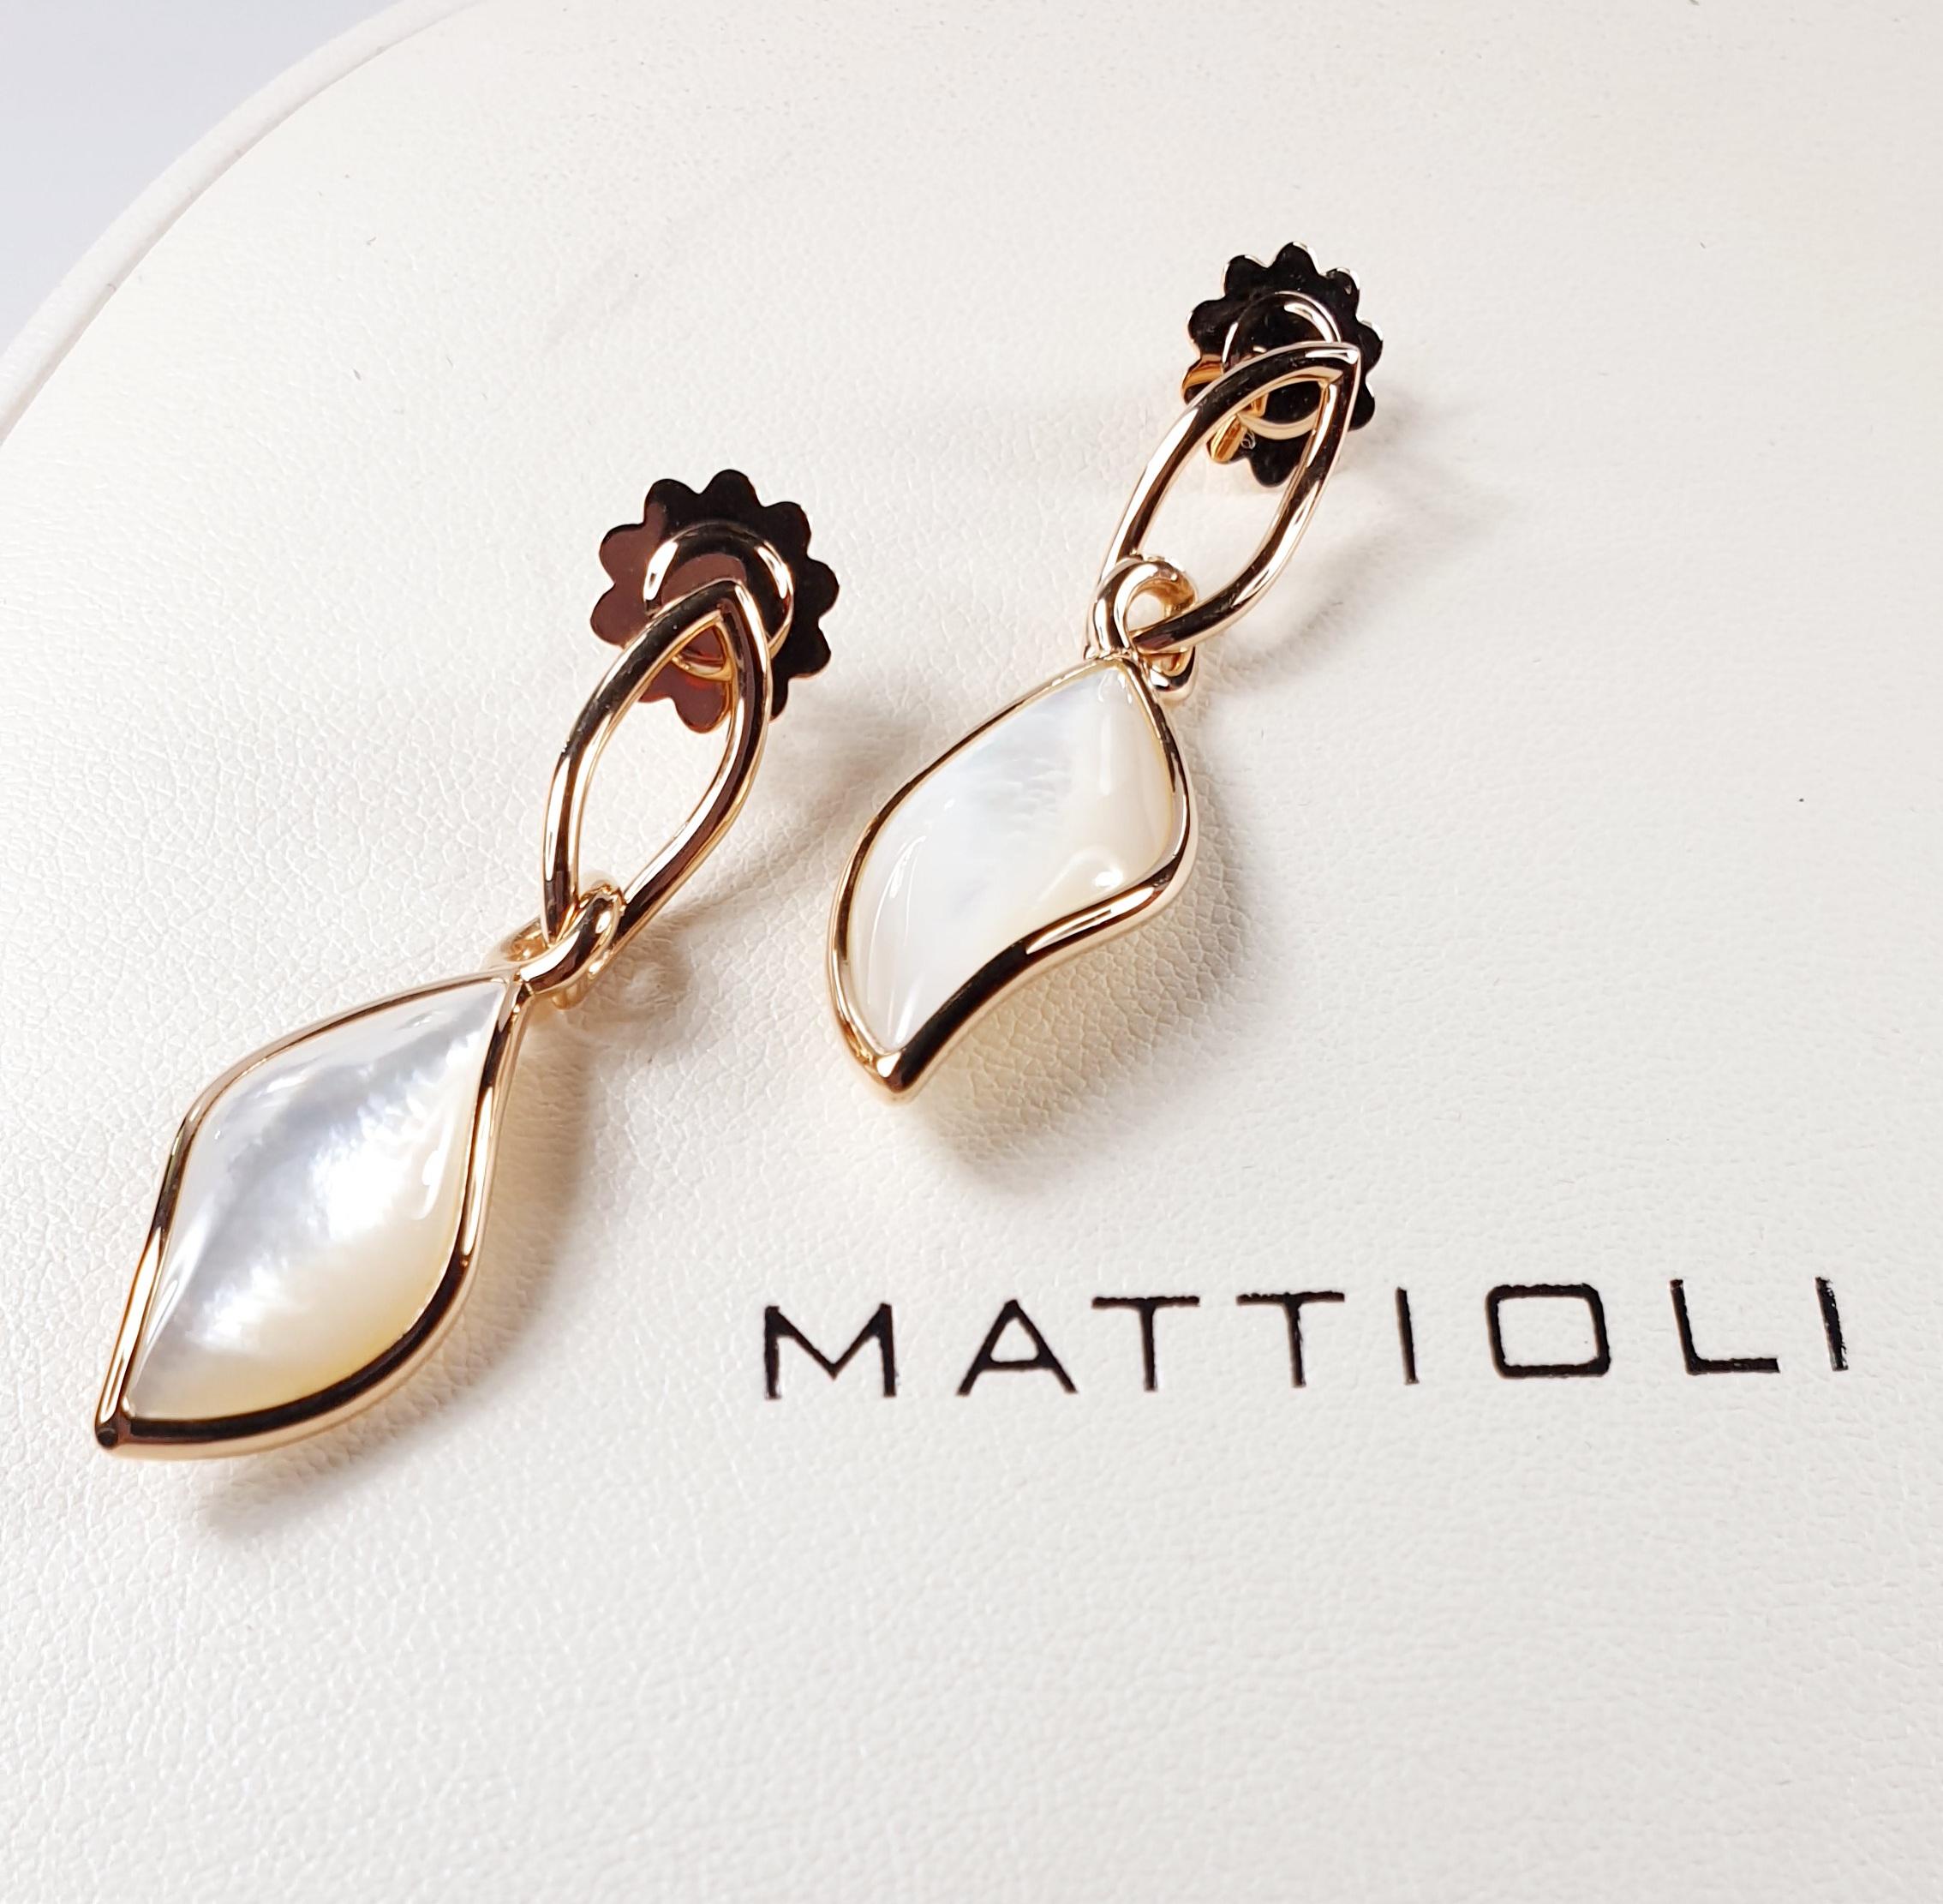 Mattioli Navettes earrings in 18 k rose gold and mother of pearl 
Lengh  4,5 cm  1,77 inches
READY TO SHIP
*Shipment of this piece is not affected by COVID-19. Orders welcome!

MATTIOLI 
The company owes its success to the most celebrated masterful